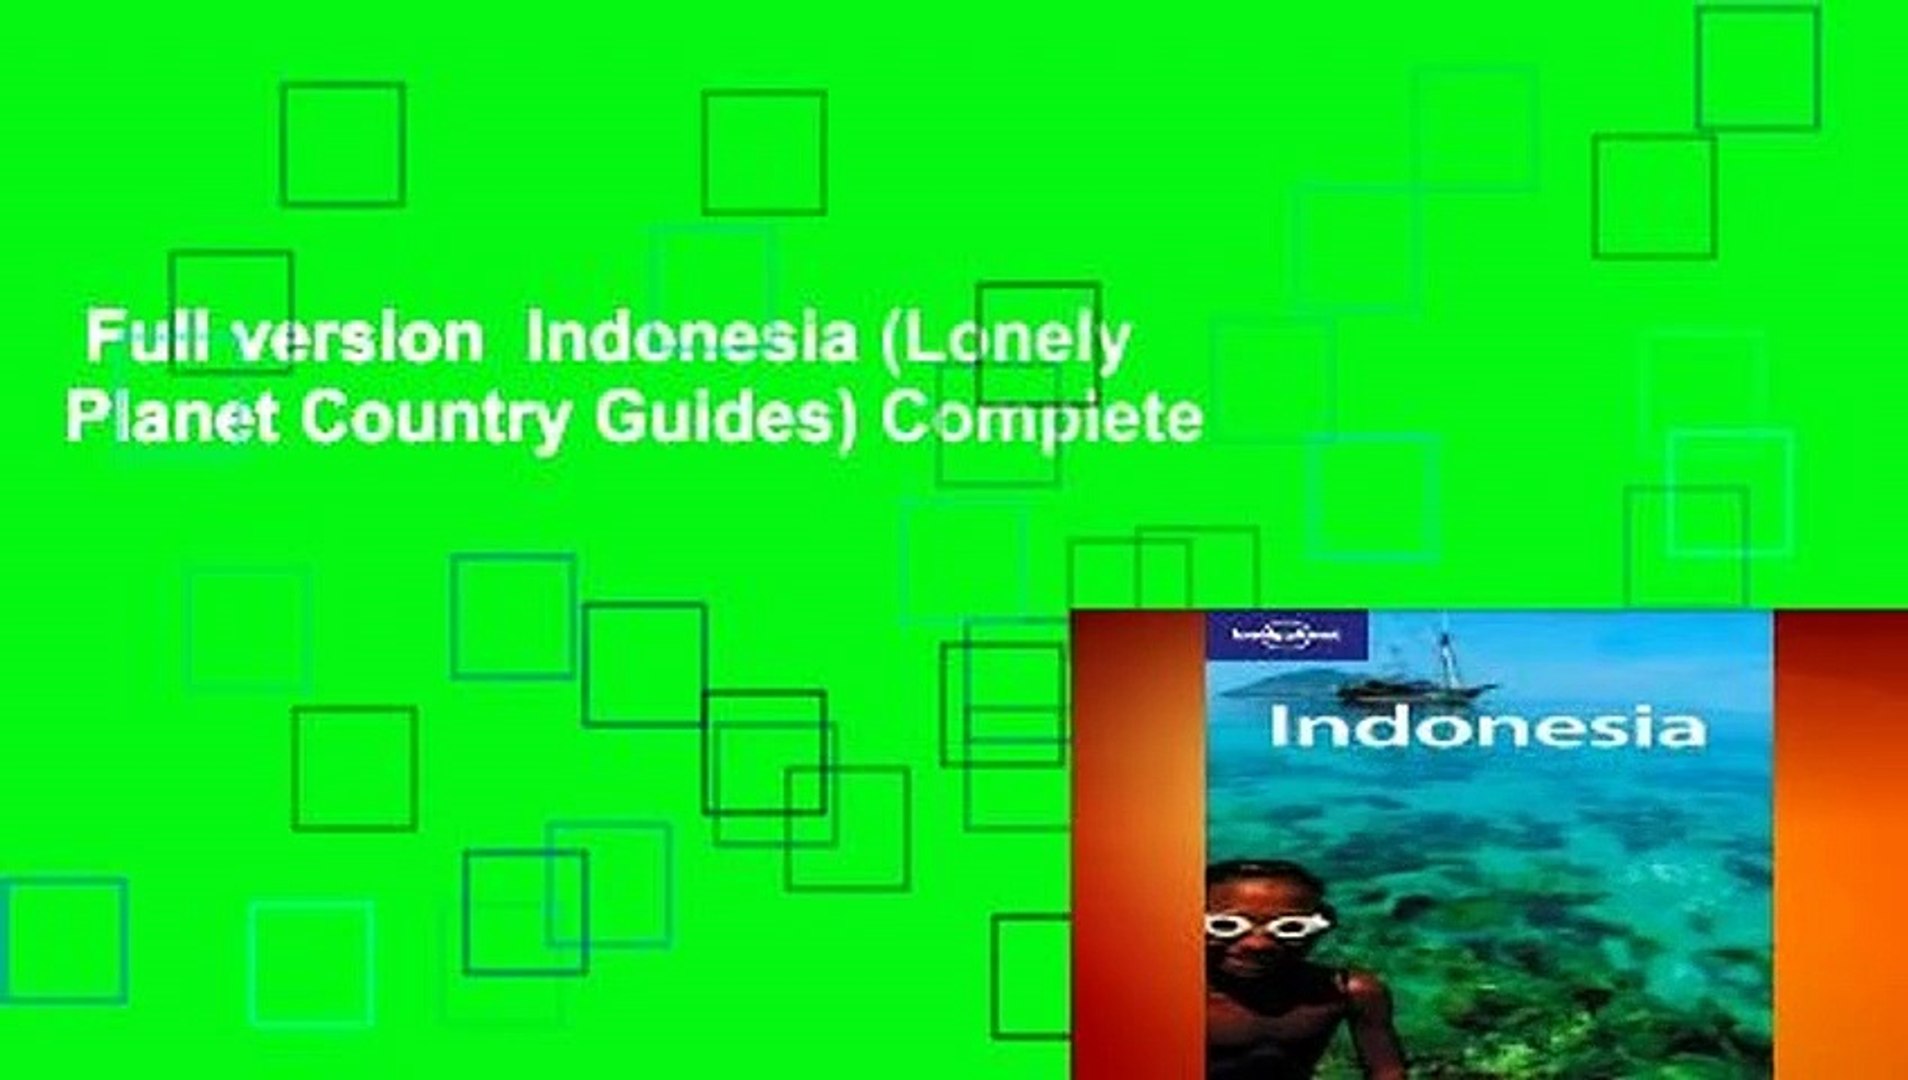 Full version Indonesia (Lonely Planet Country Guides) Complete